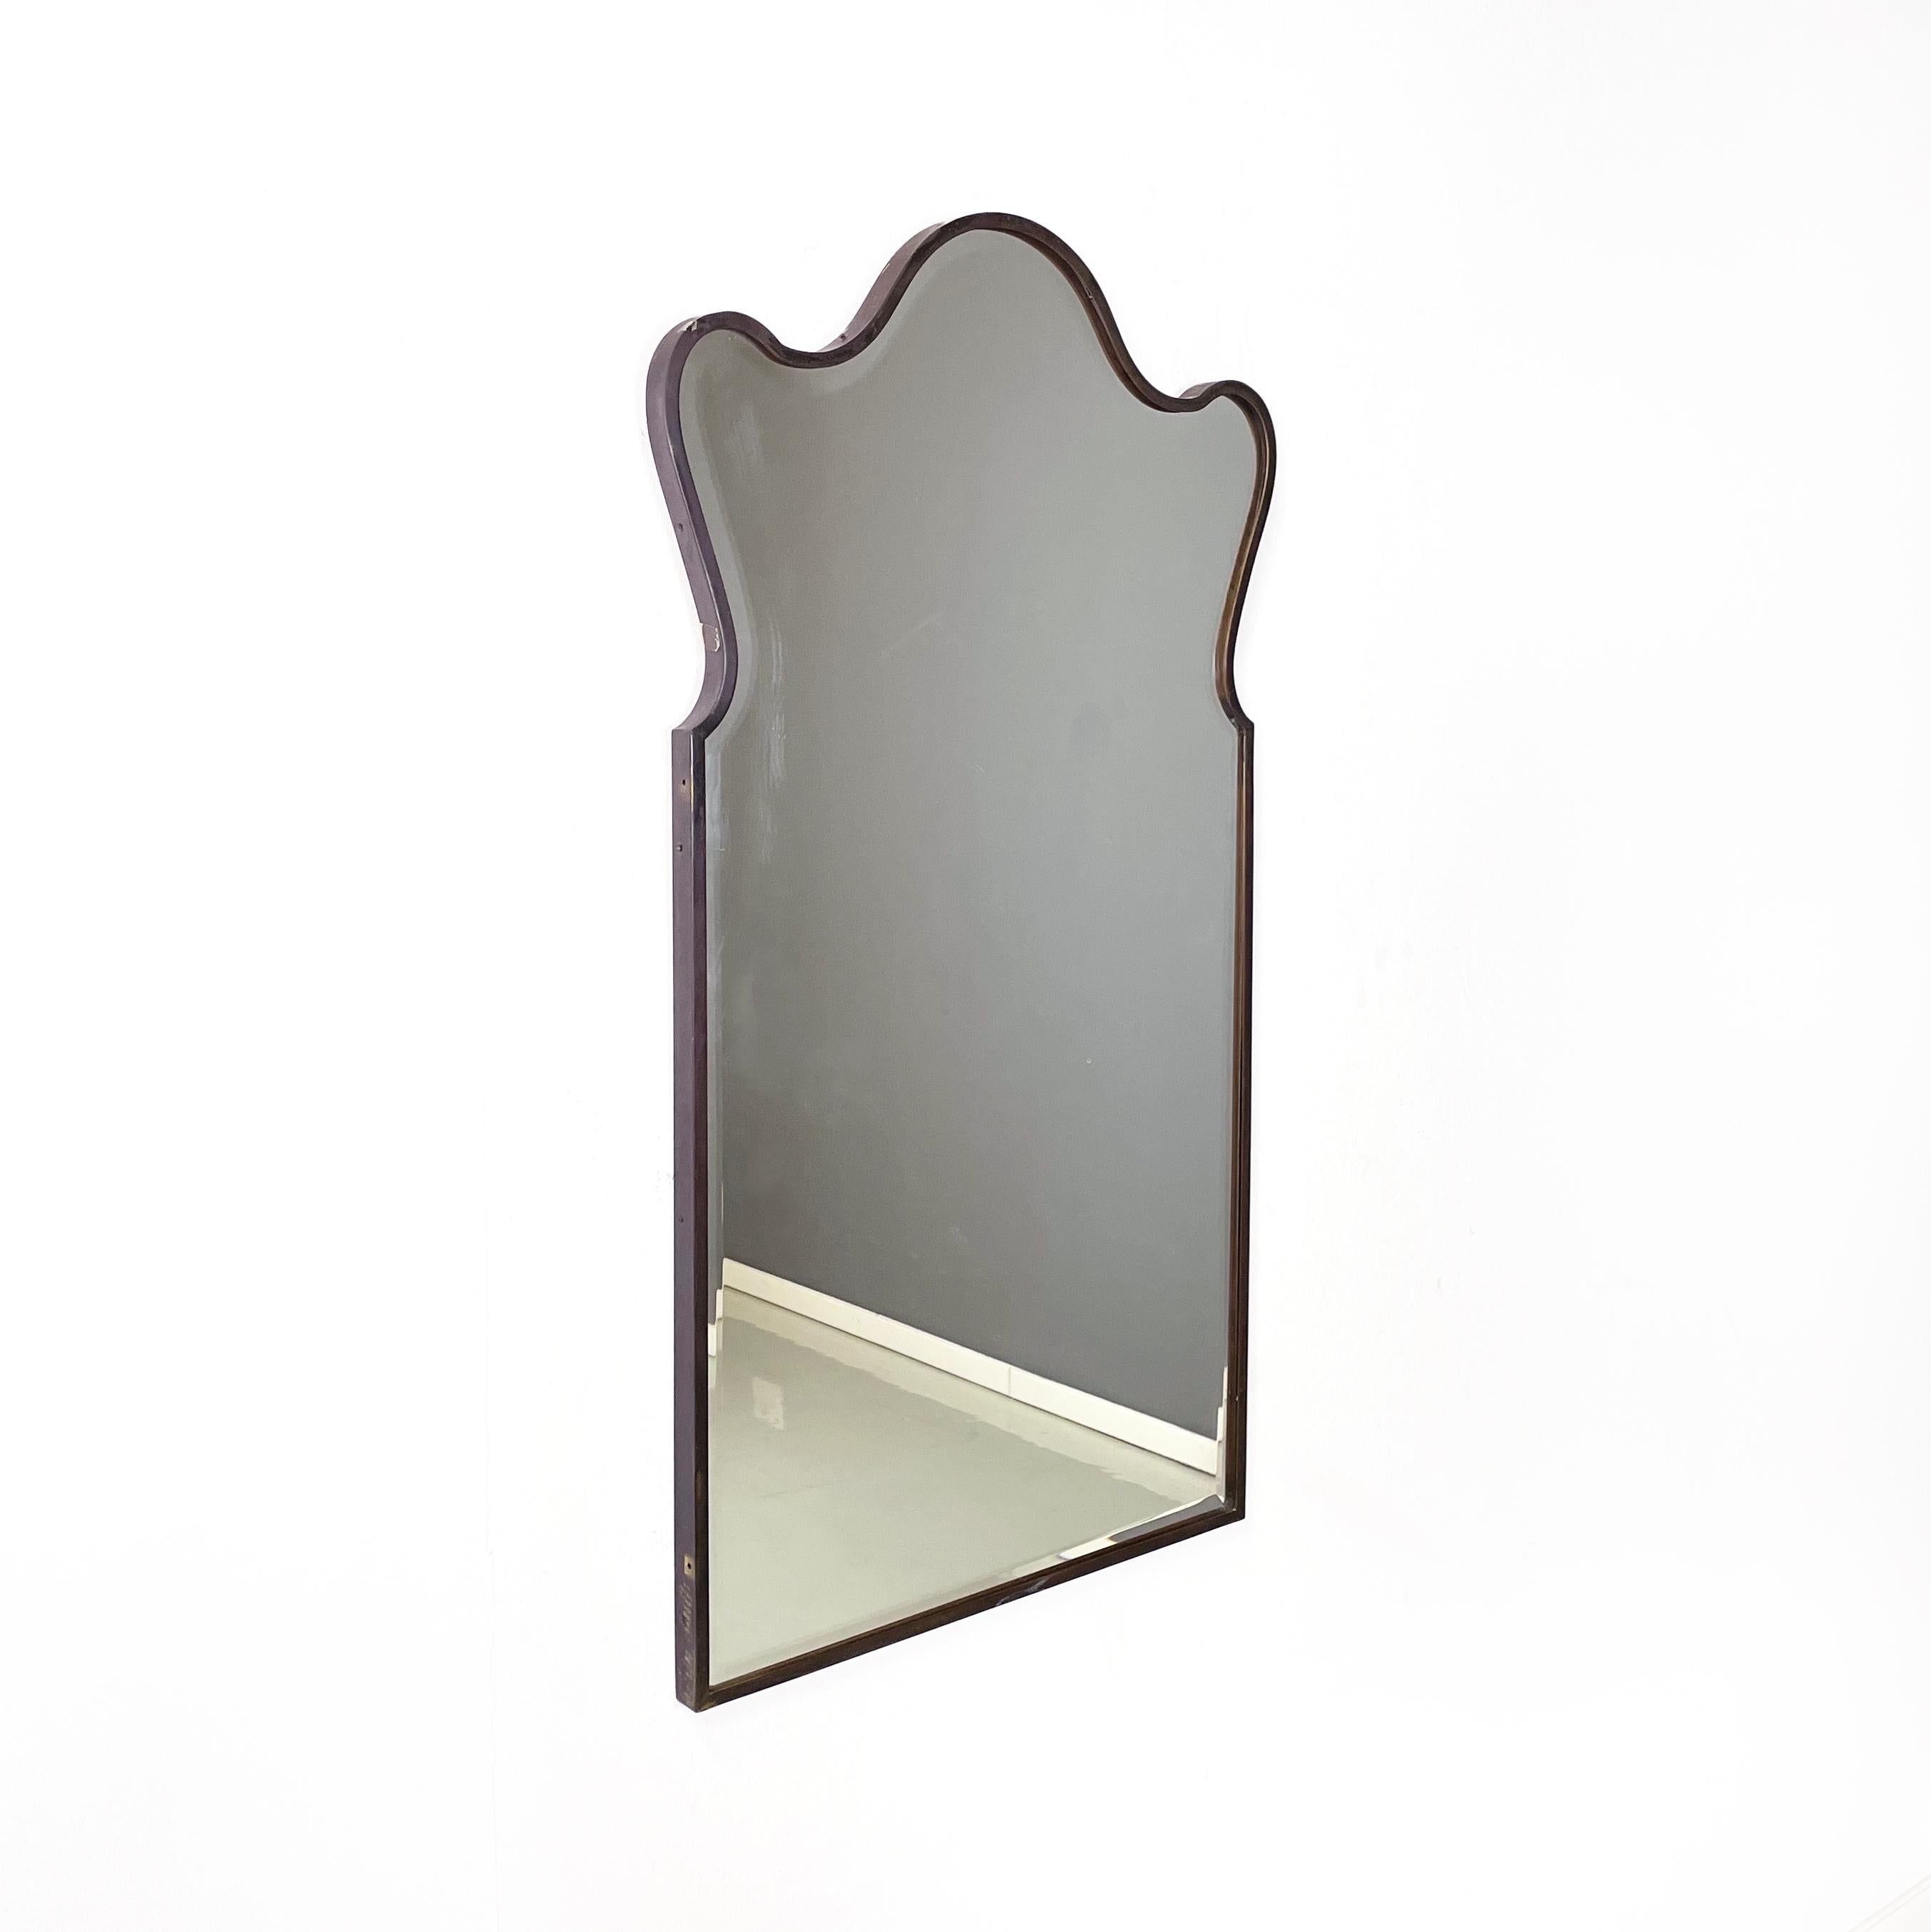 Italian mid century modern Shaped wall mirror in dark metal frame, 1960s
Wall mirror with shaped dark metal frame. The upper part of the mirror is rounded, while the lower part is squared. Internal wooden structure.
1960 approx.
Vintage condition,